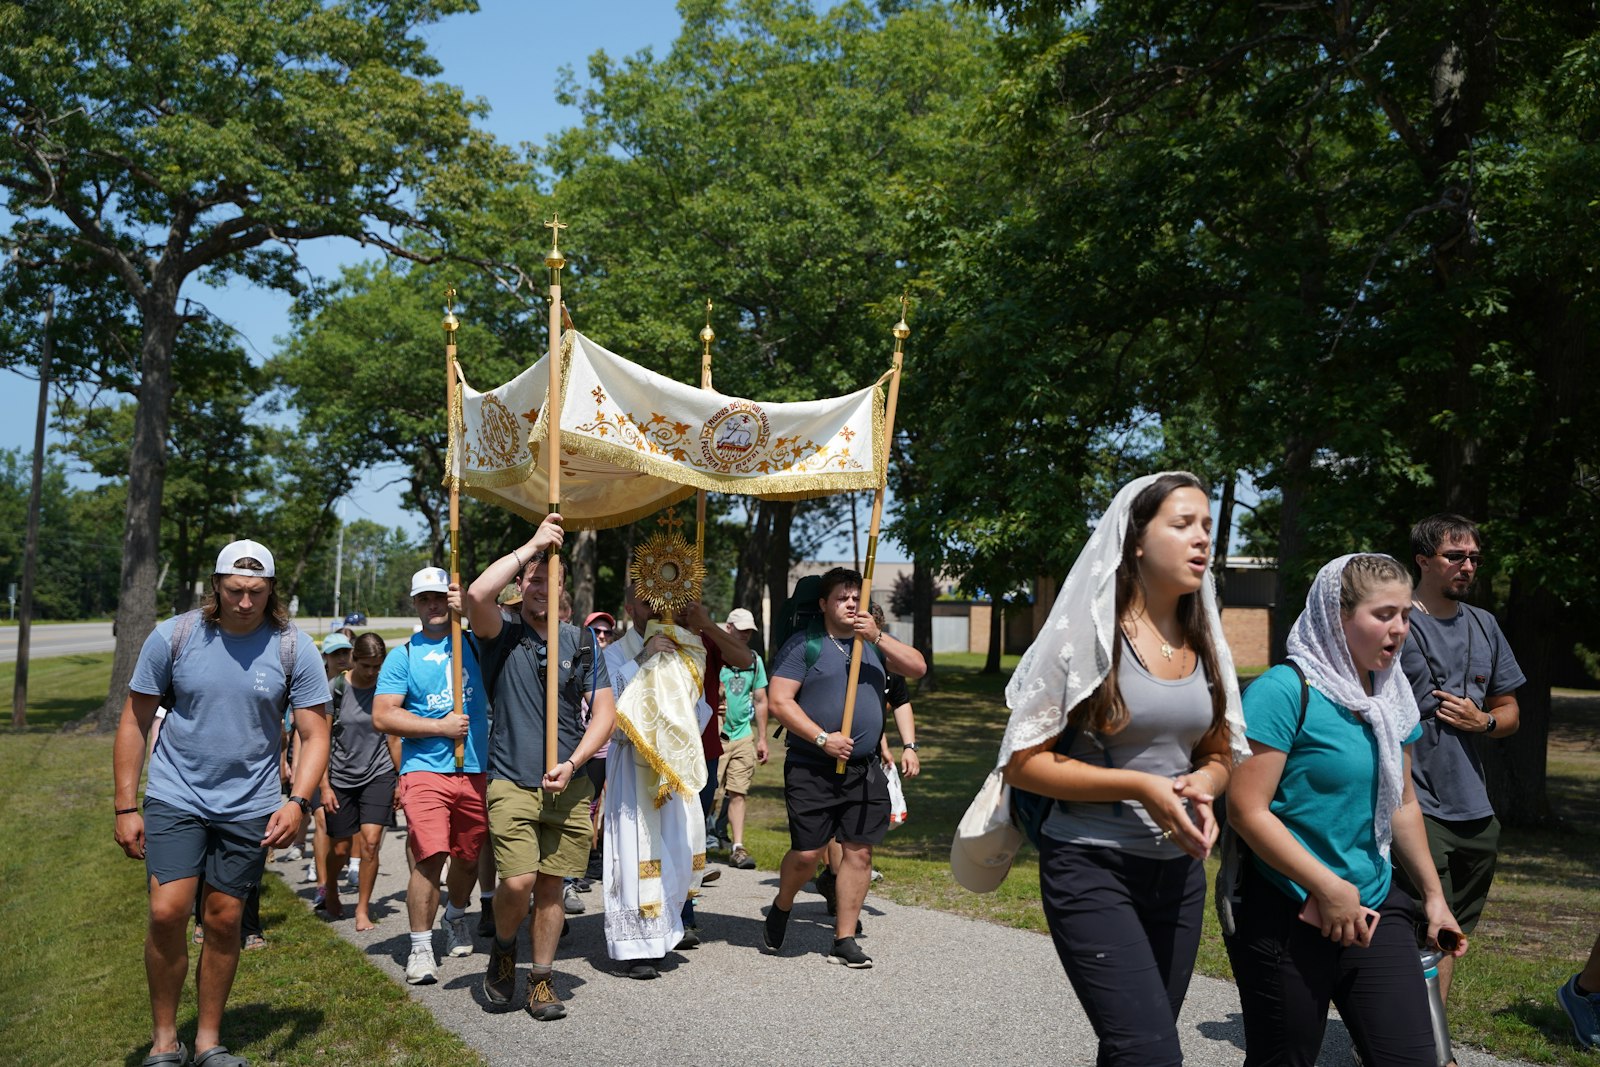 Young adults process with the Eucharist on their way to the National Shrine of the Cross in the Woods in Indian River. The procession crossed through the town of Indian River, which was hosting a fair that day.